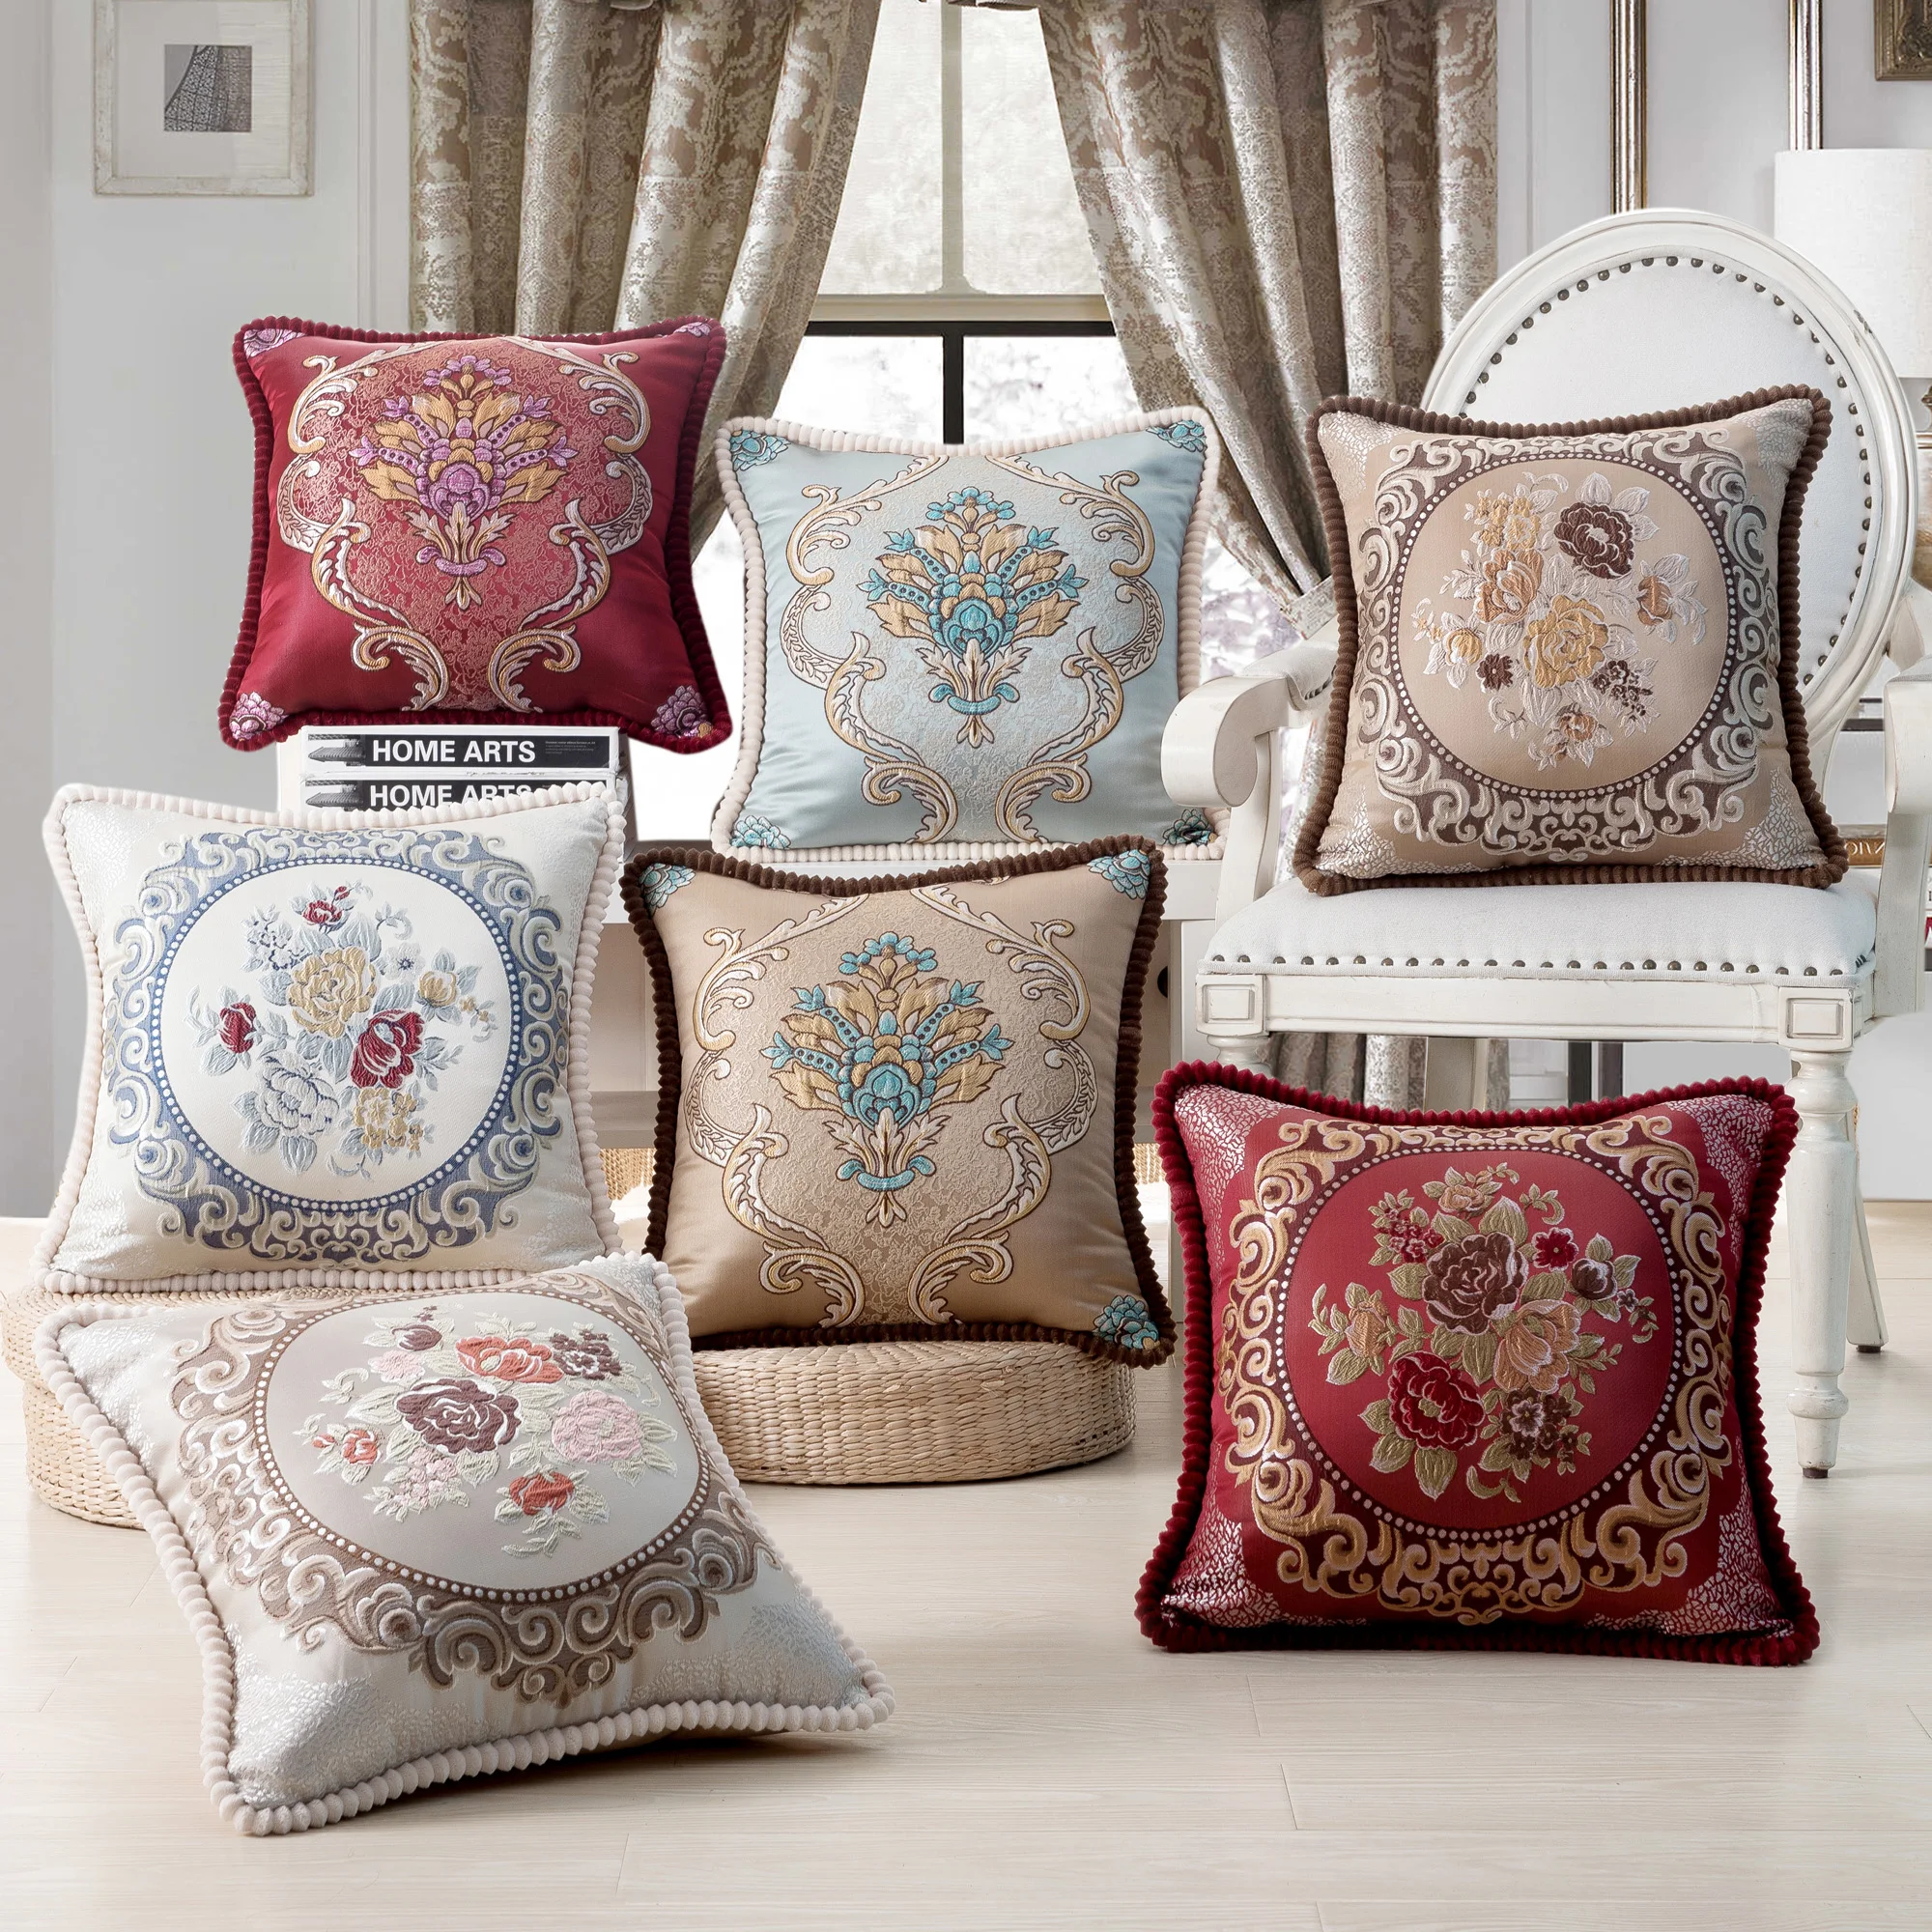 25 Styles Flower Embroidery Cushion Cover Pillow Cases Bead String Jacquard Cushion Covers for Living Bedroom Home Decor 48x48